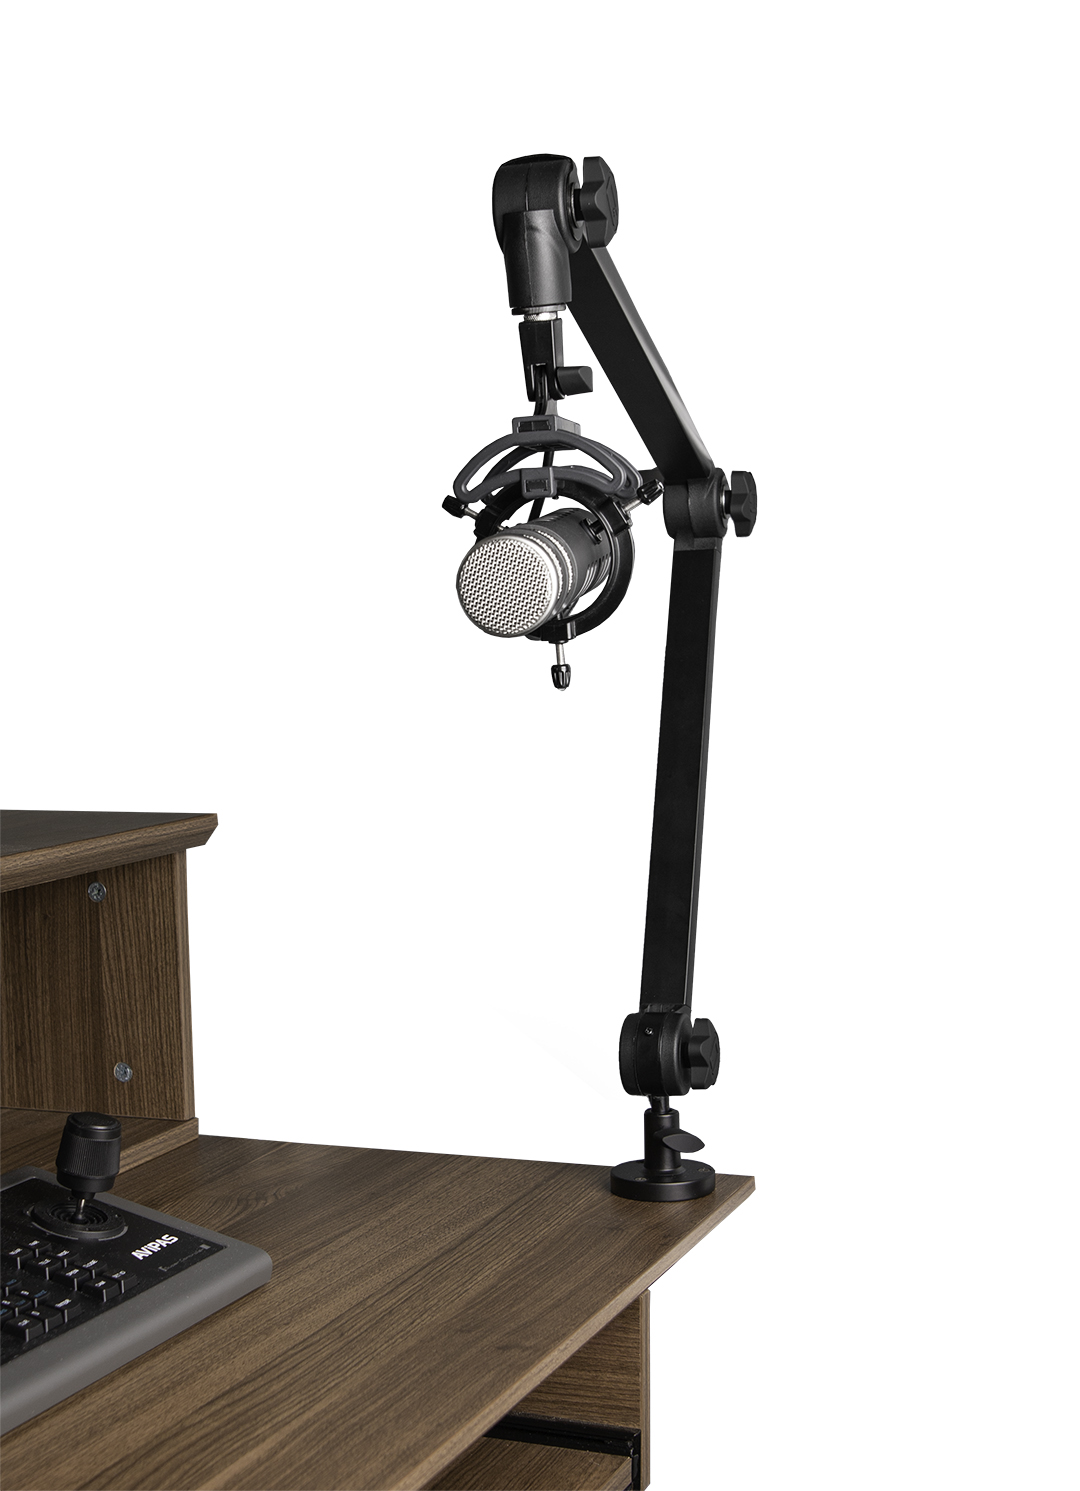 Shure Shure Deluxe Articulating Desktop Mic Boom Stand with MV7X Microphone